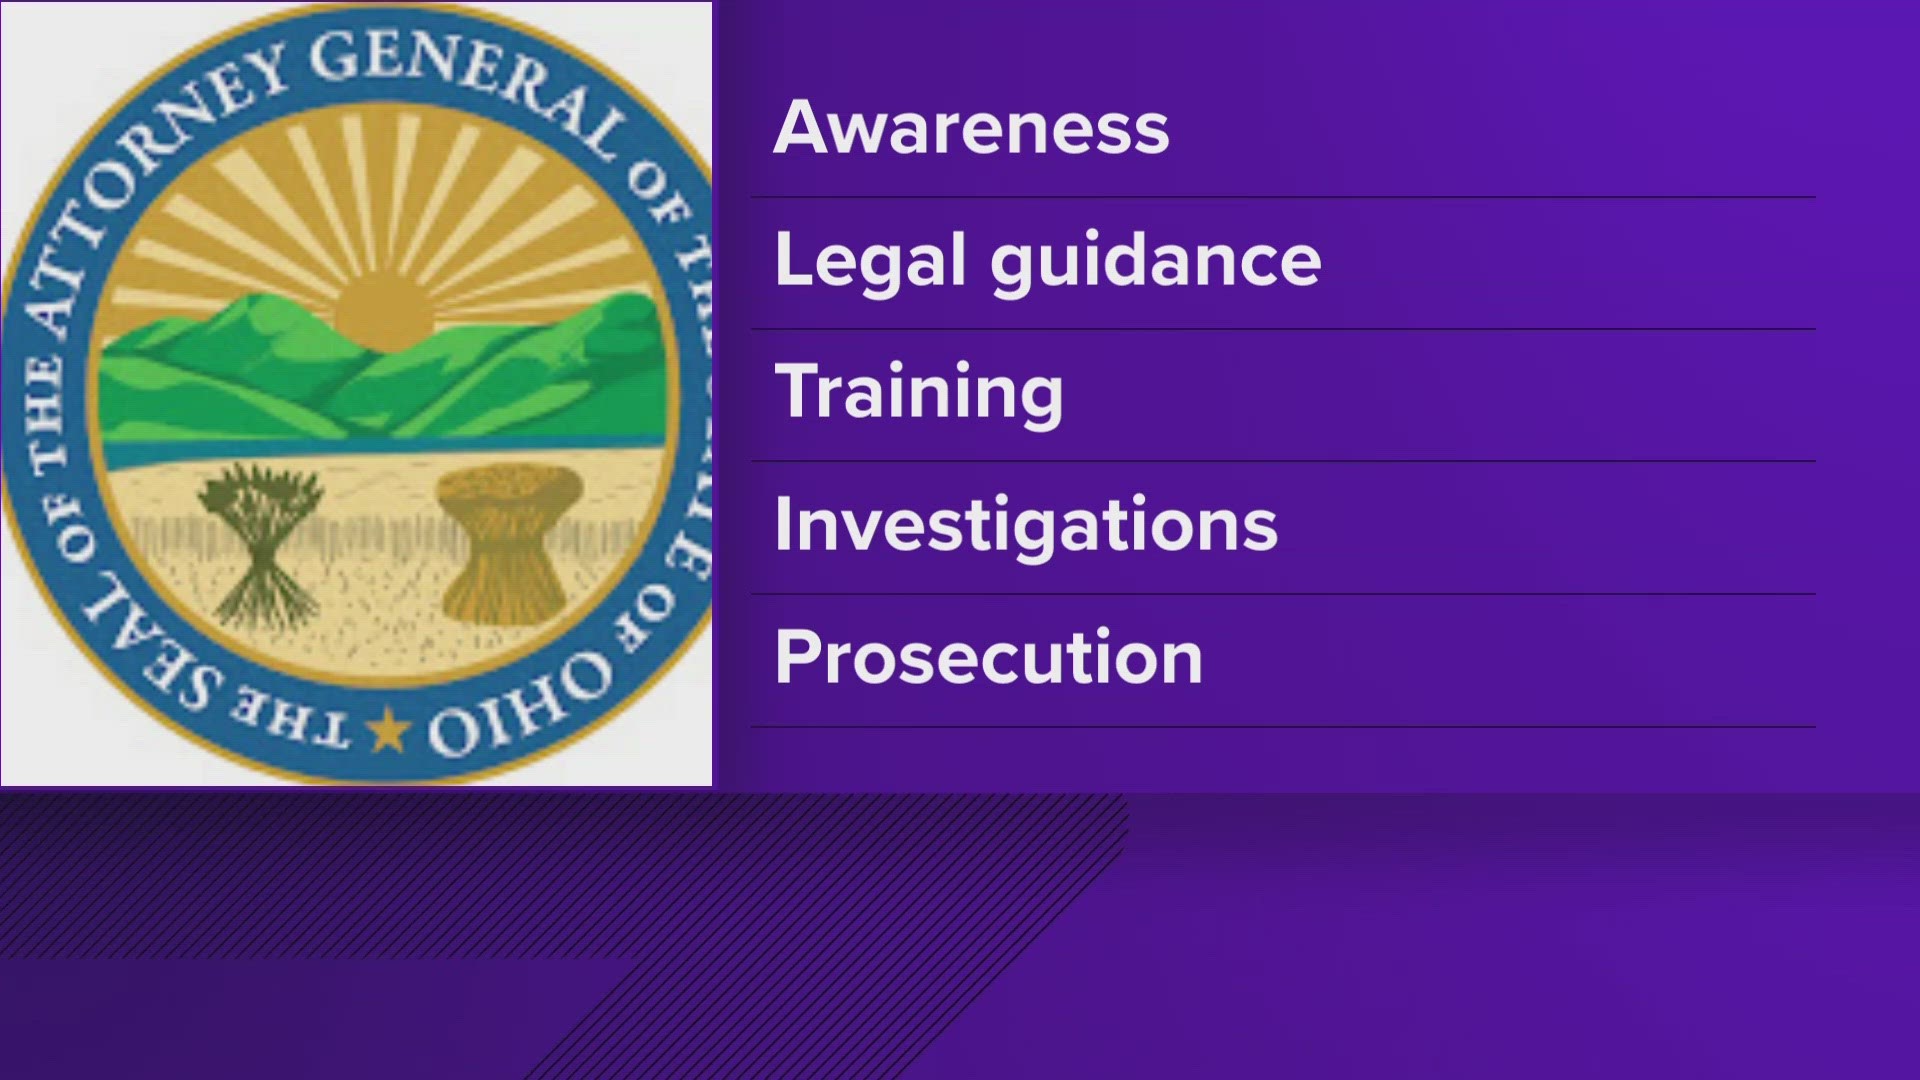 The $1.1 million initiative will be rolled out in phases, according to Ohio Attorney General Dave Yost’s office.